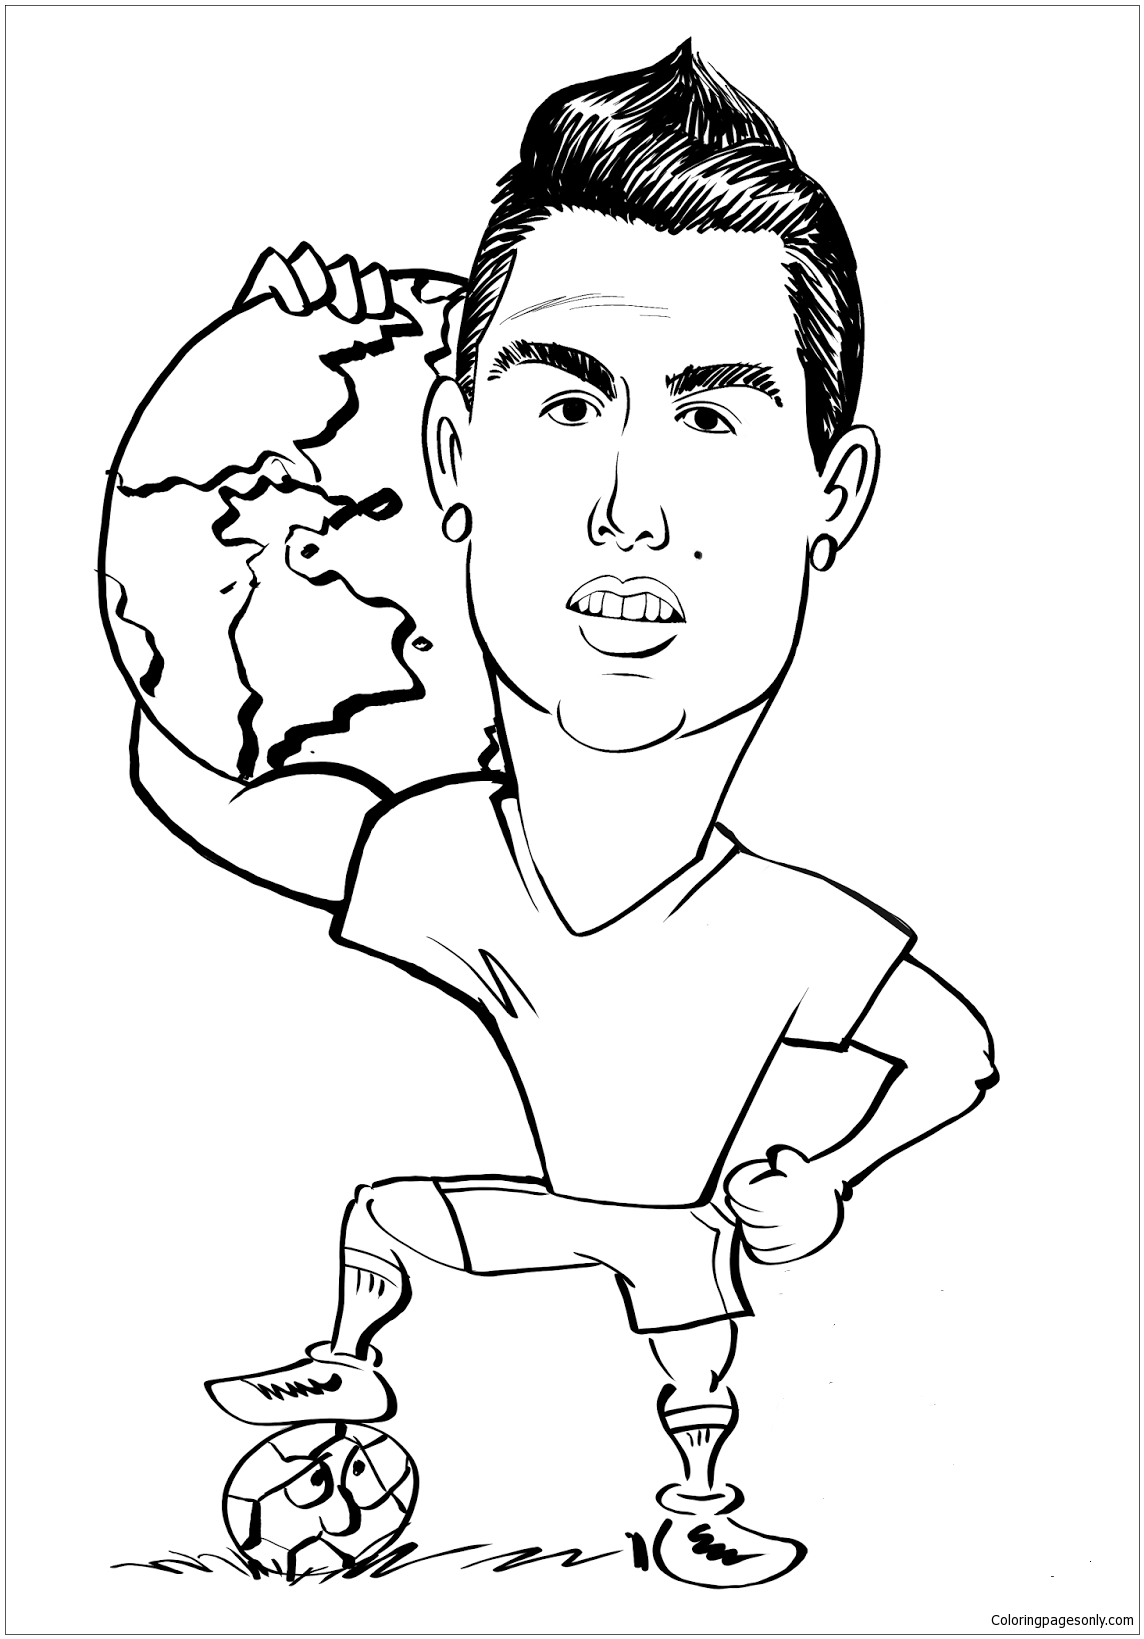 Download Cristiano Ronaldo Coloring Printables Coloring Pages